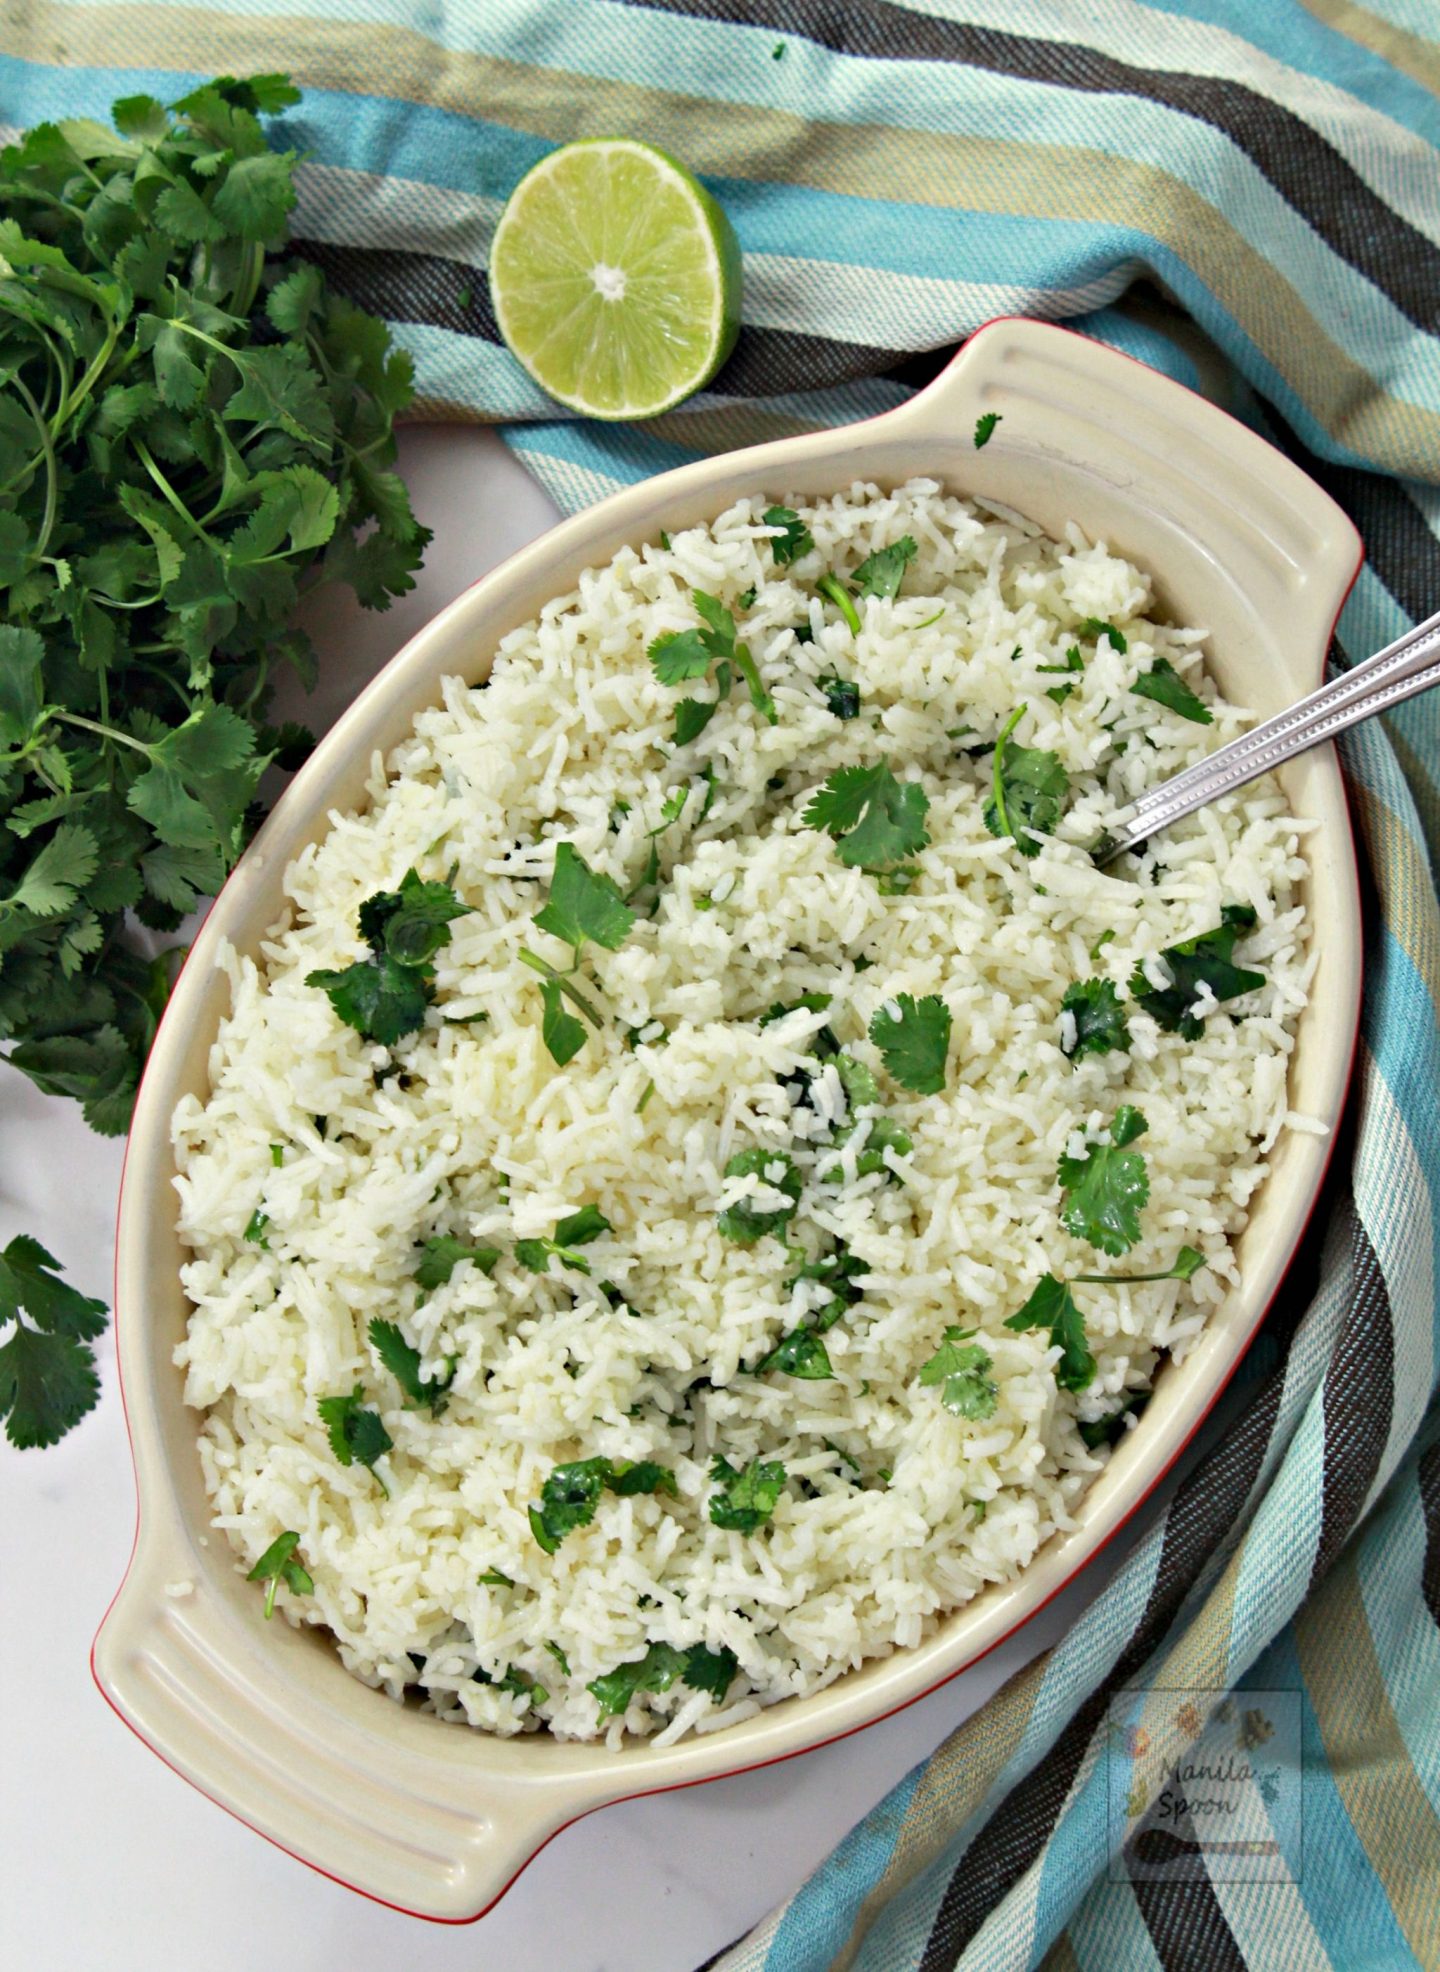  A combination of citrus juices make this Cilantro Lime Rice so tasty without being too tangy - so perfectly balanced. Everyone loves this and it's one of my oft-requested recipes! Easy to make, too!! #cilantro #lime #rice #cilantrolimerice